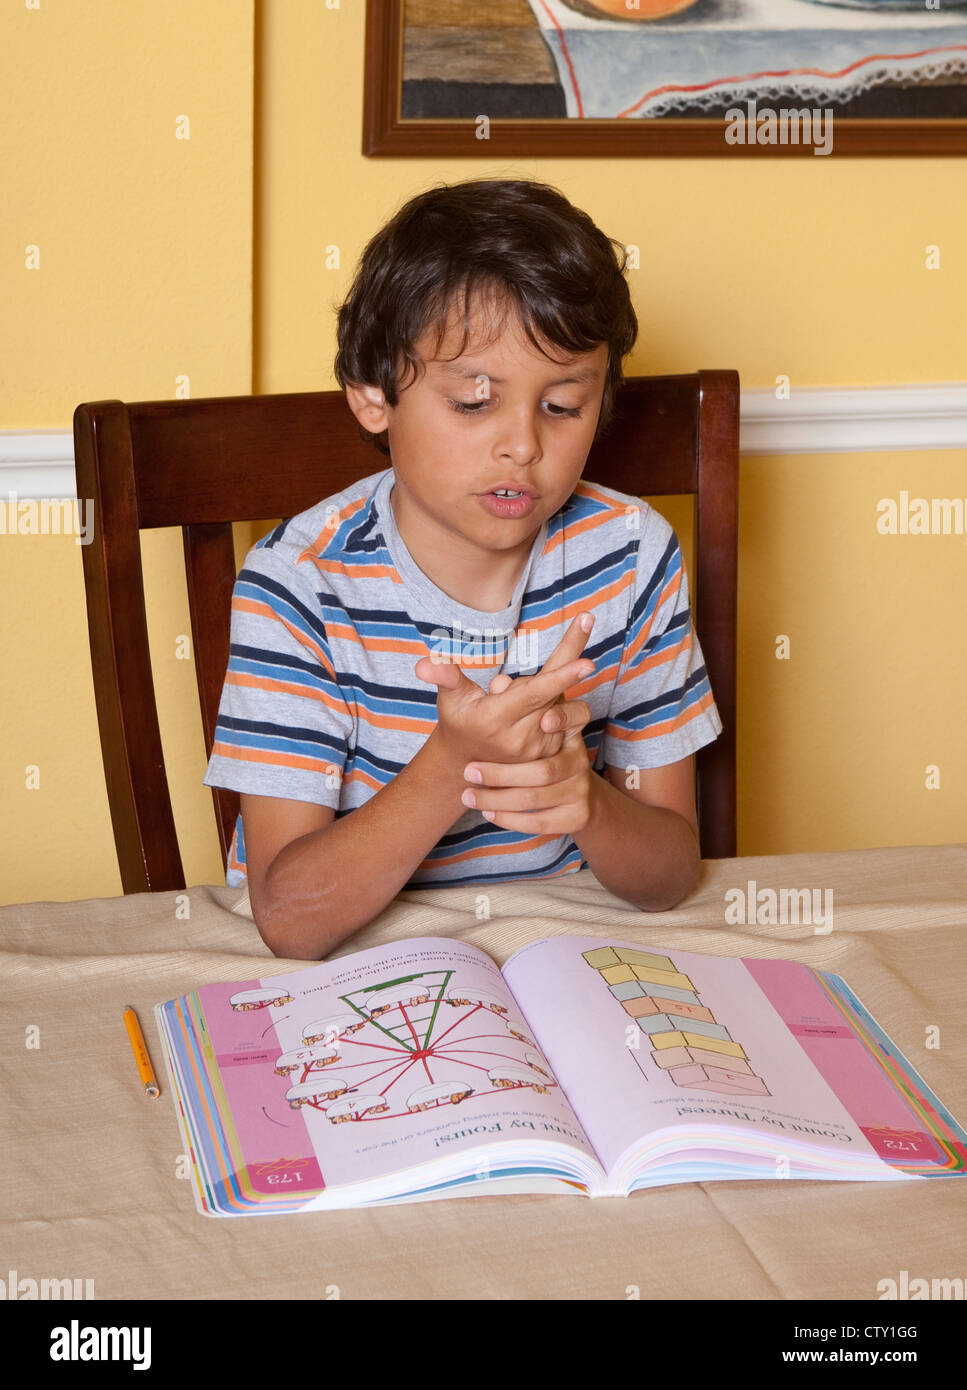 8 year old Mexican-American elementary school age boy uses fingers to help count while doing math school work while at home Stock Photo